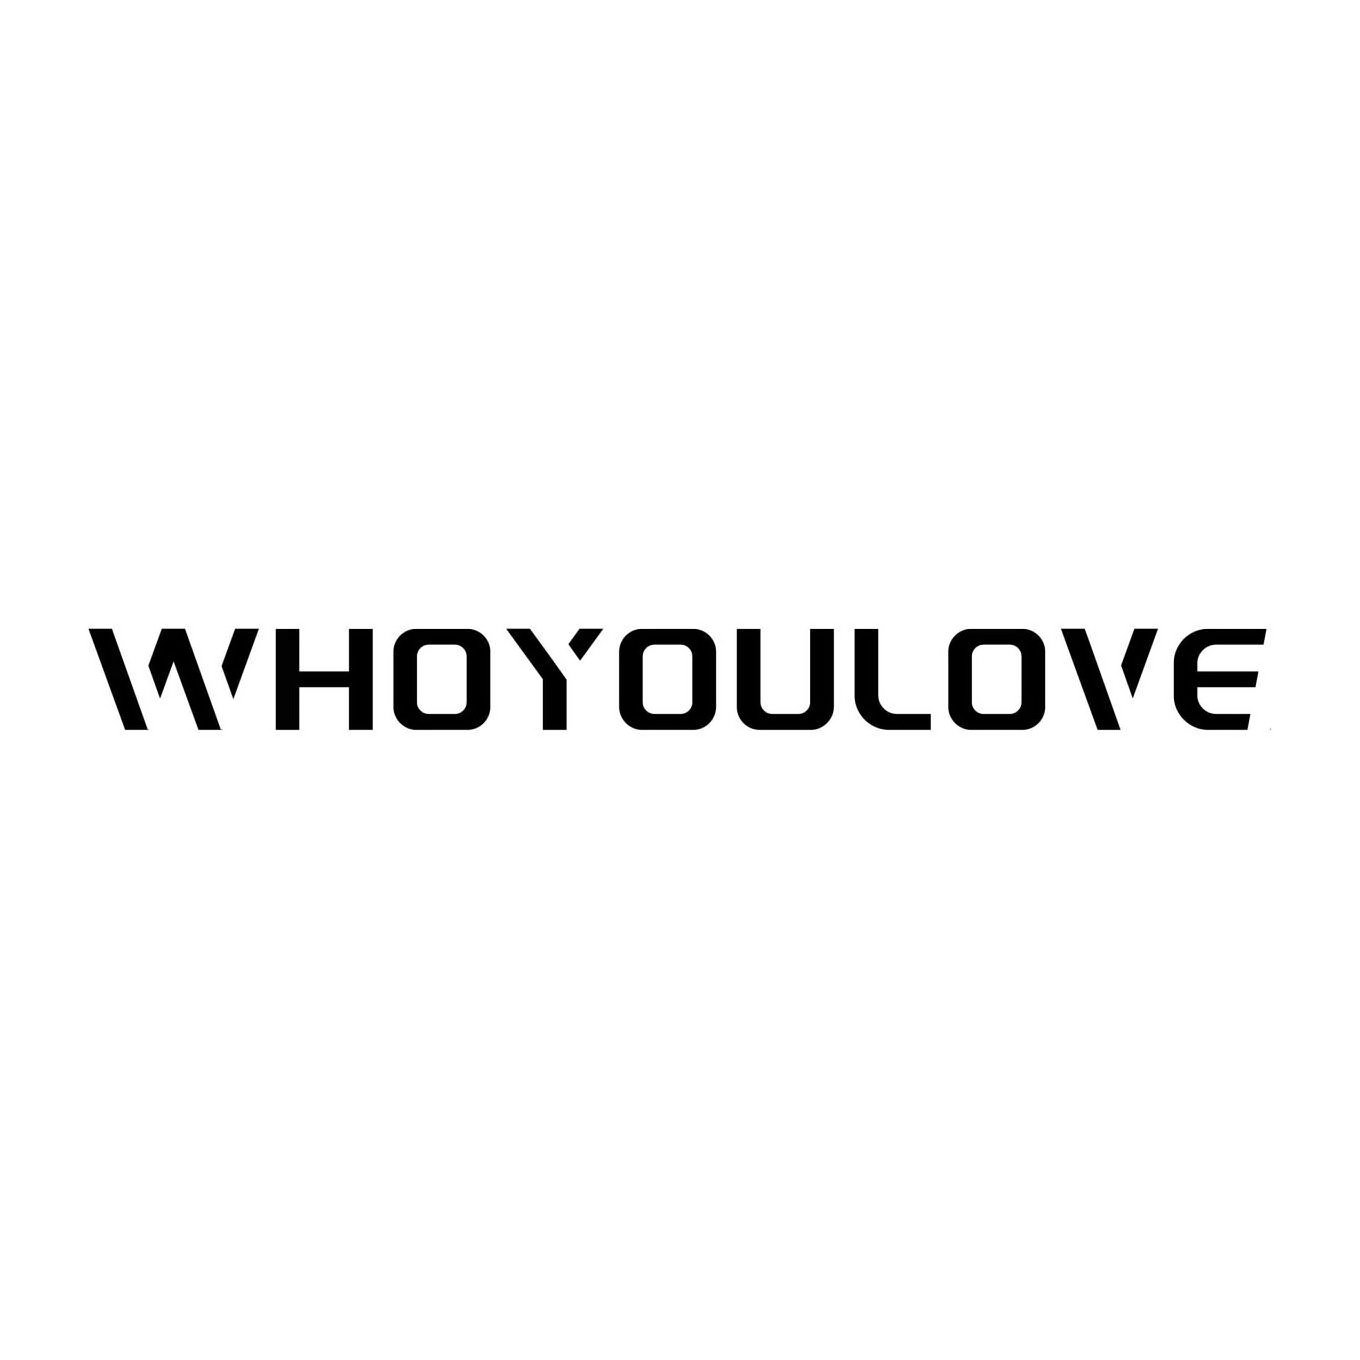  WHOYOULOVE